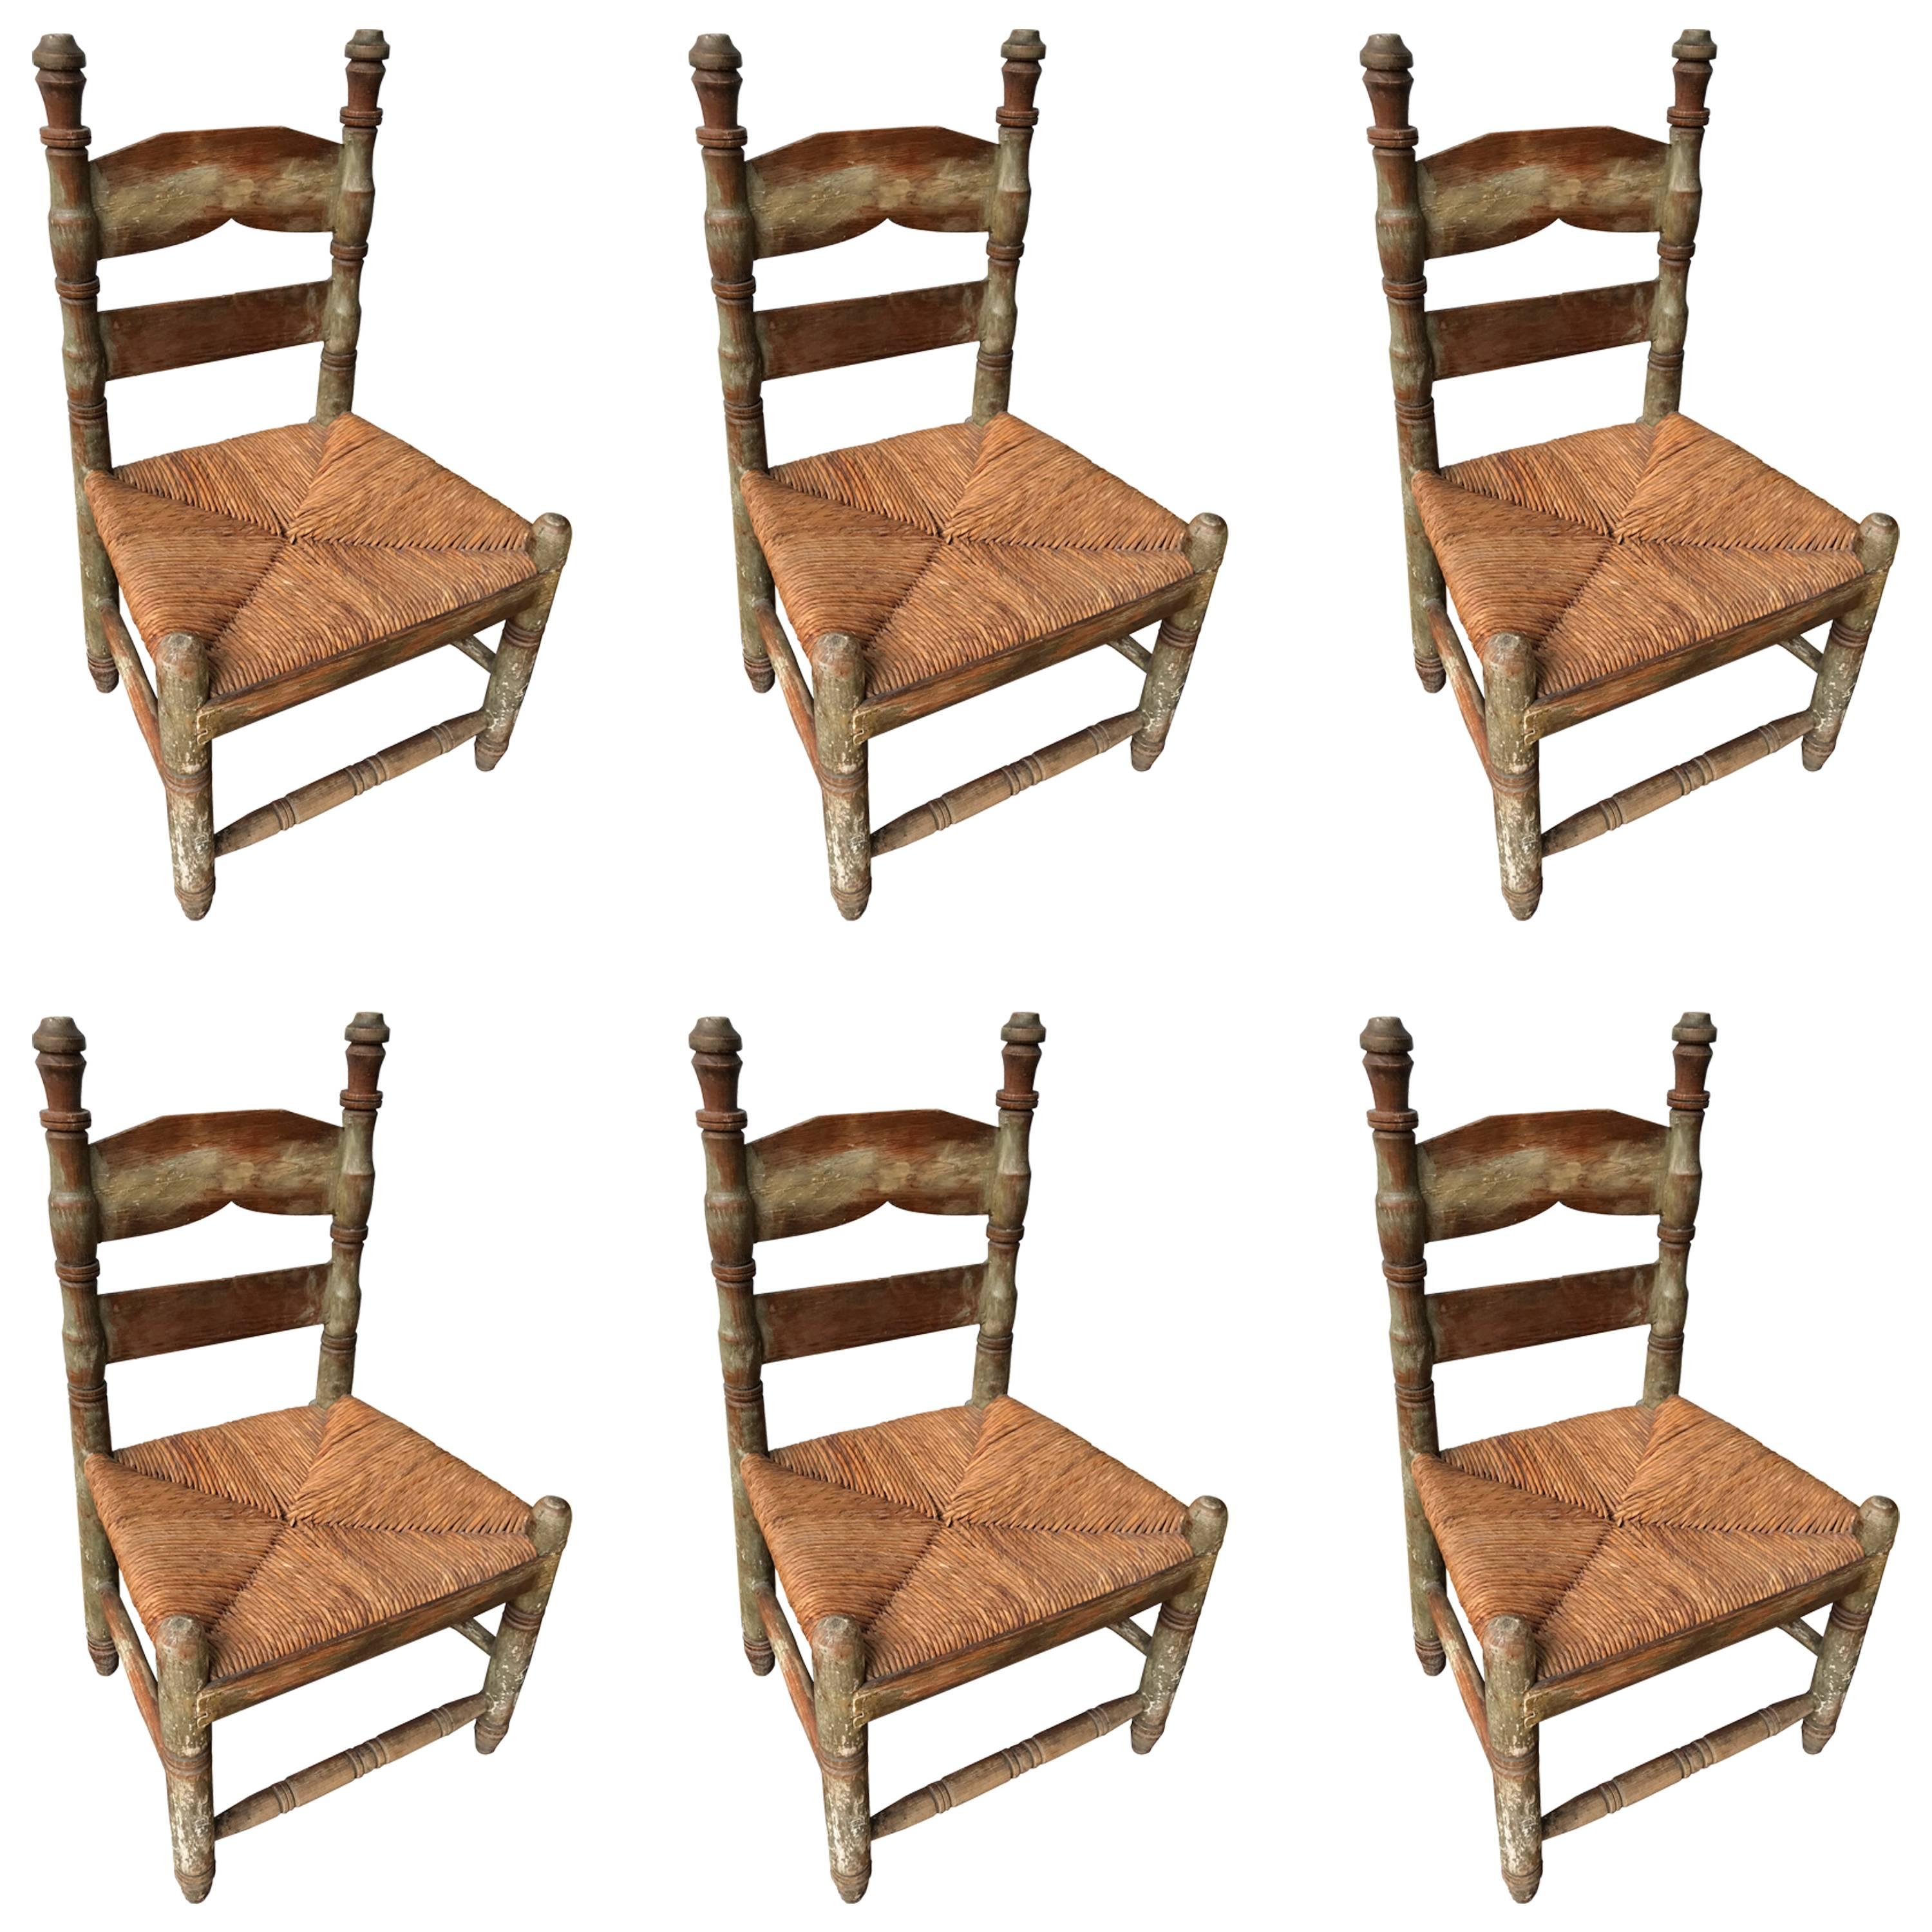 Set of Six Antique Wood Chairs found in Zacatecas, México, circa 1900